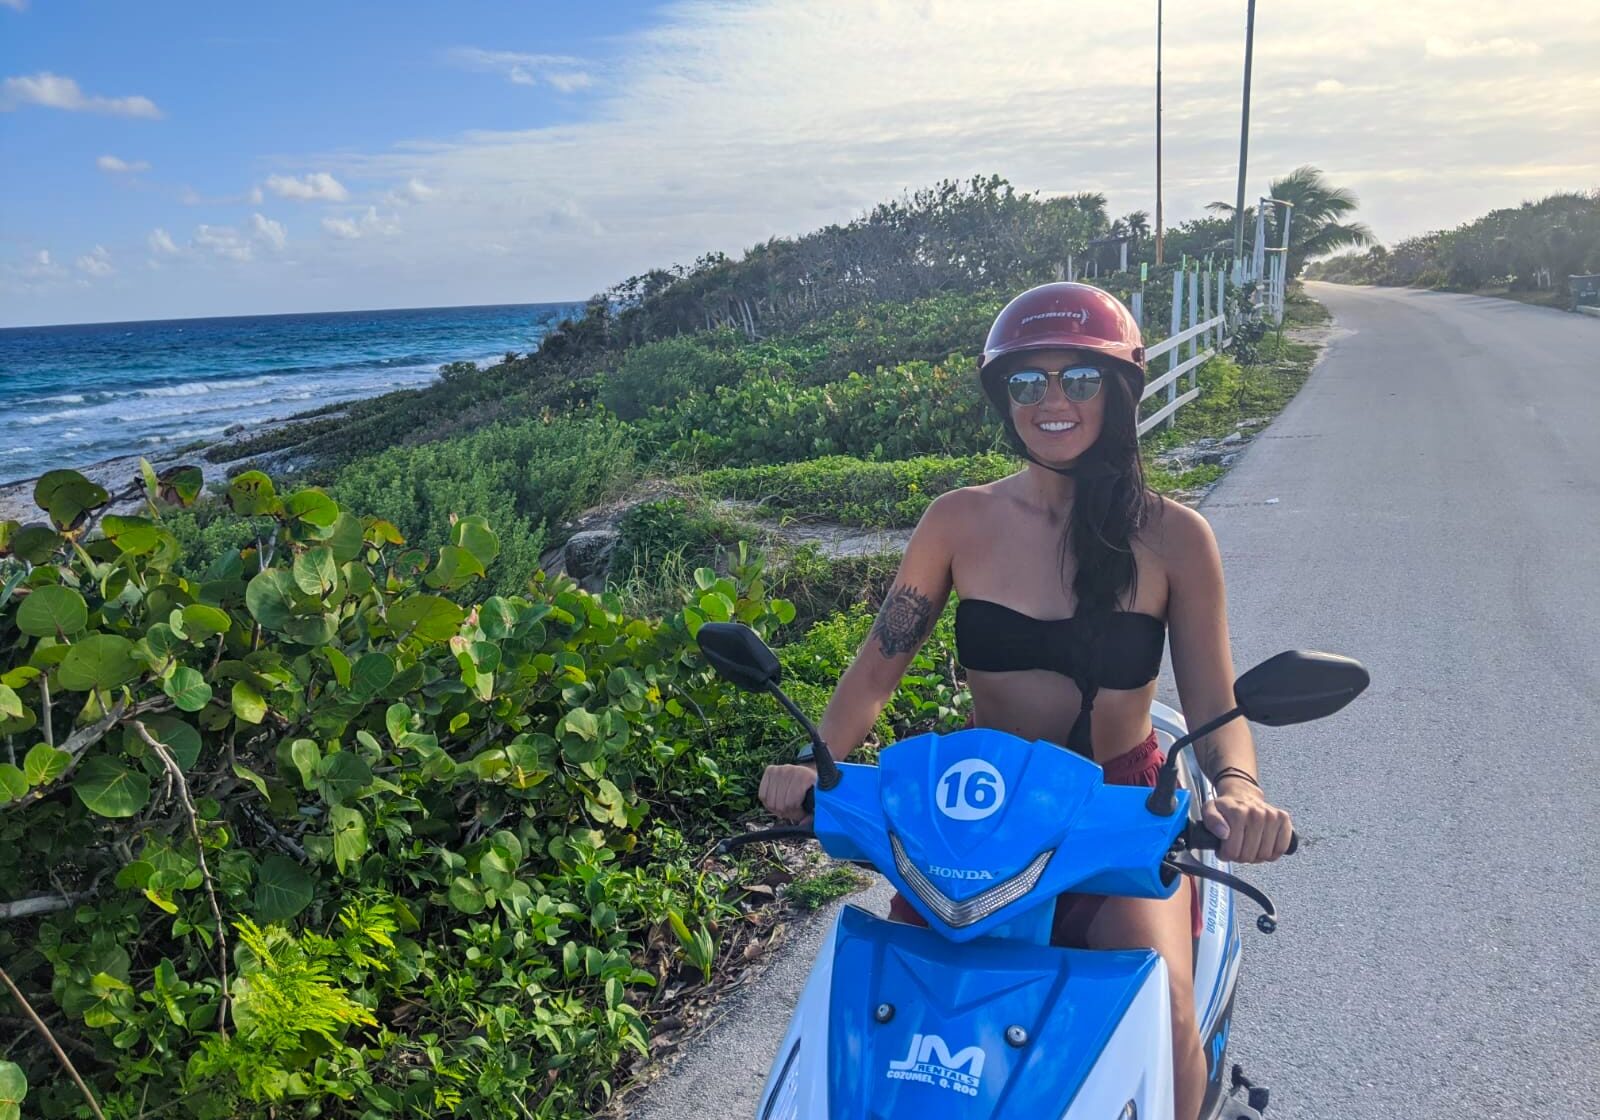 scooter rental in cozumel mexico